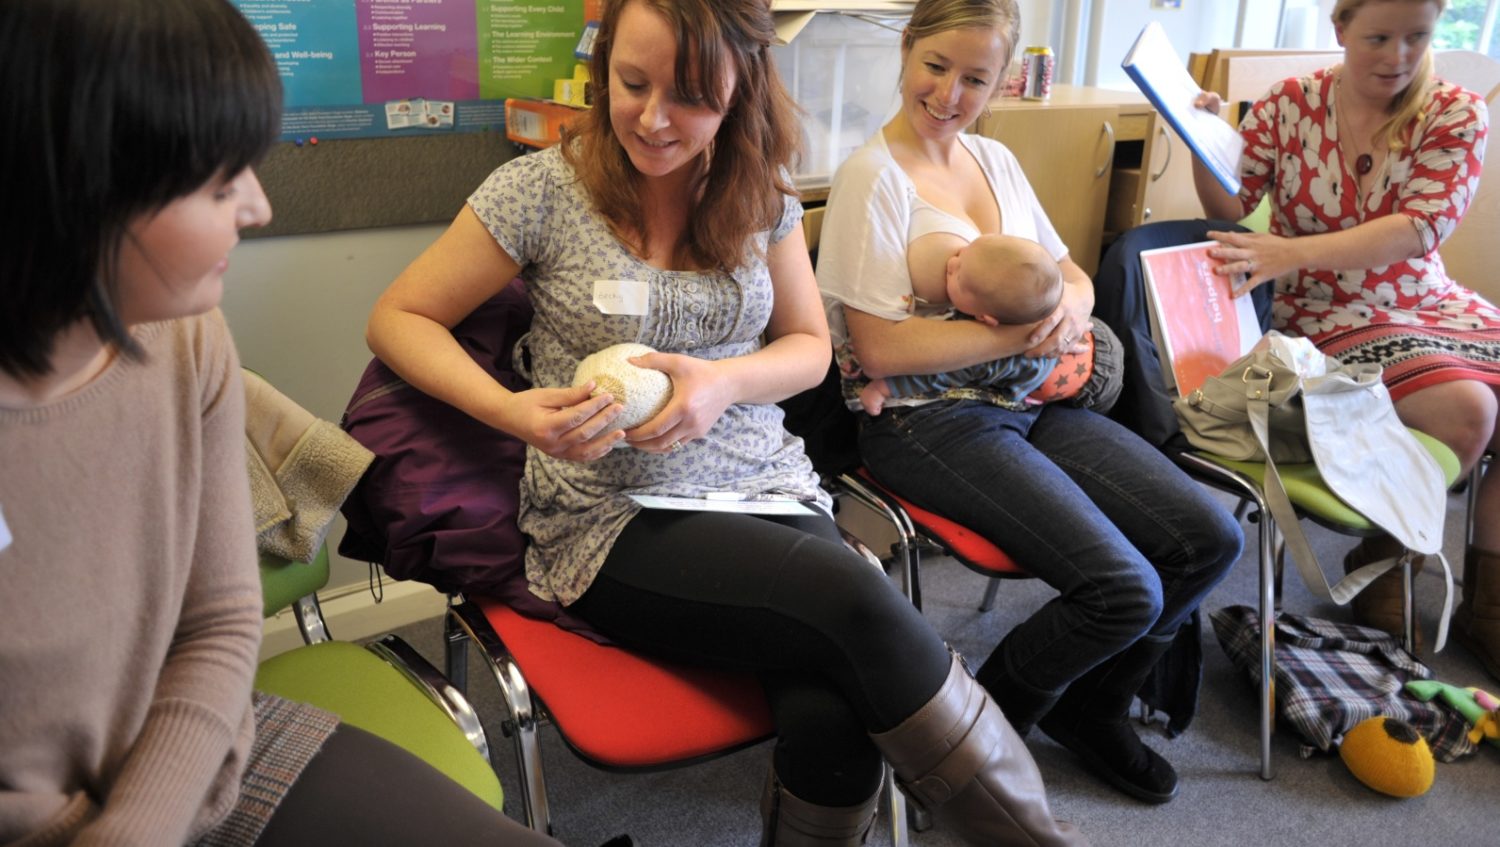 Breastfeeding While Pregnant: How to Make it Work - Breastfeeding Place